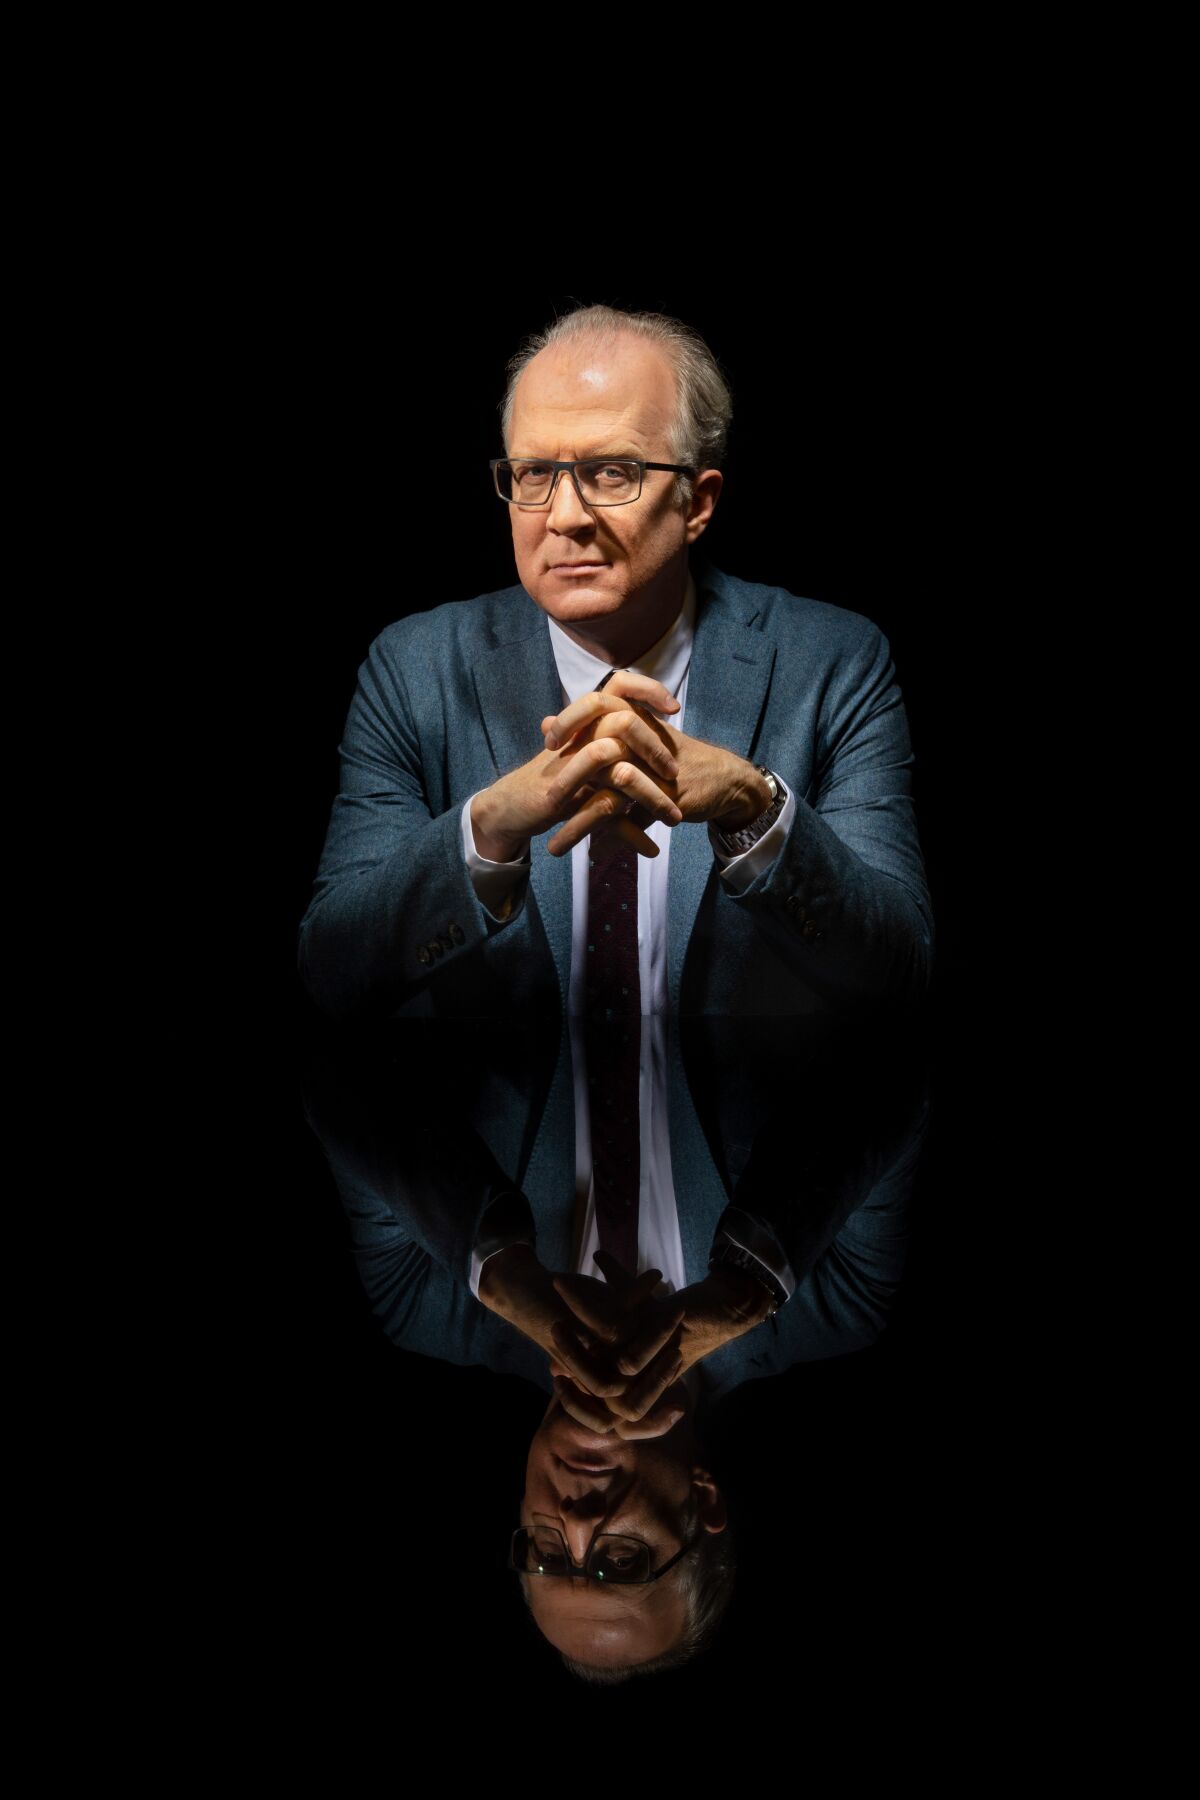 Tracy Letts plays Henry Ford II in "Ford v Ferrari"